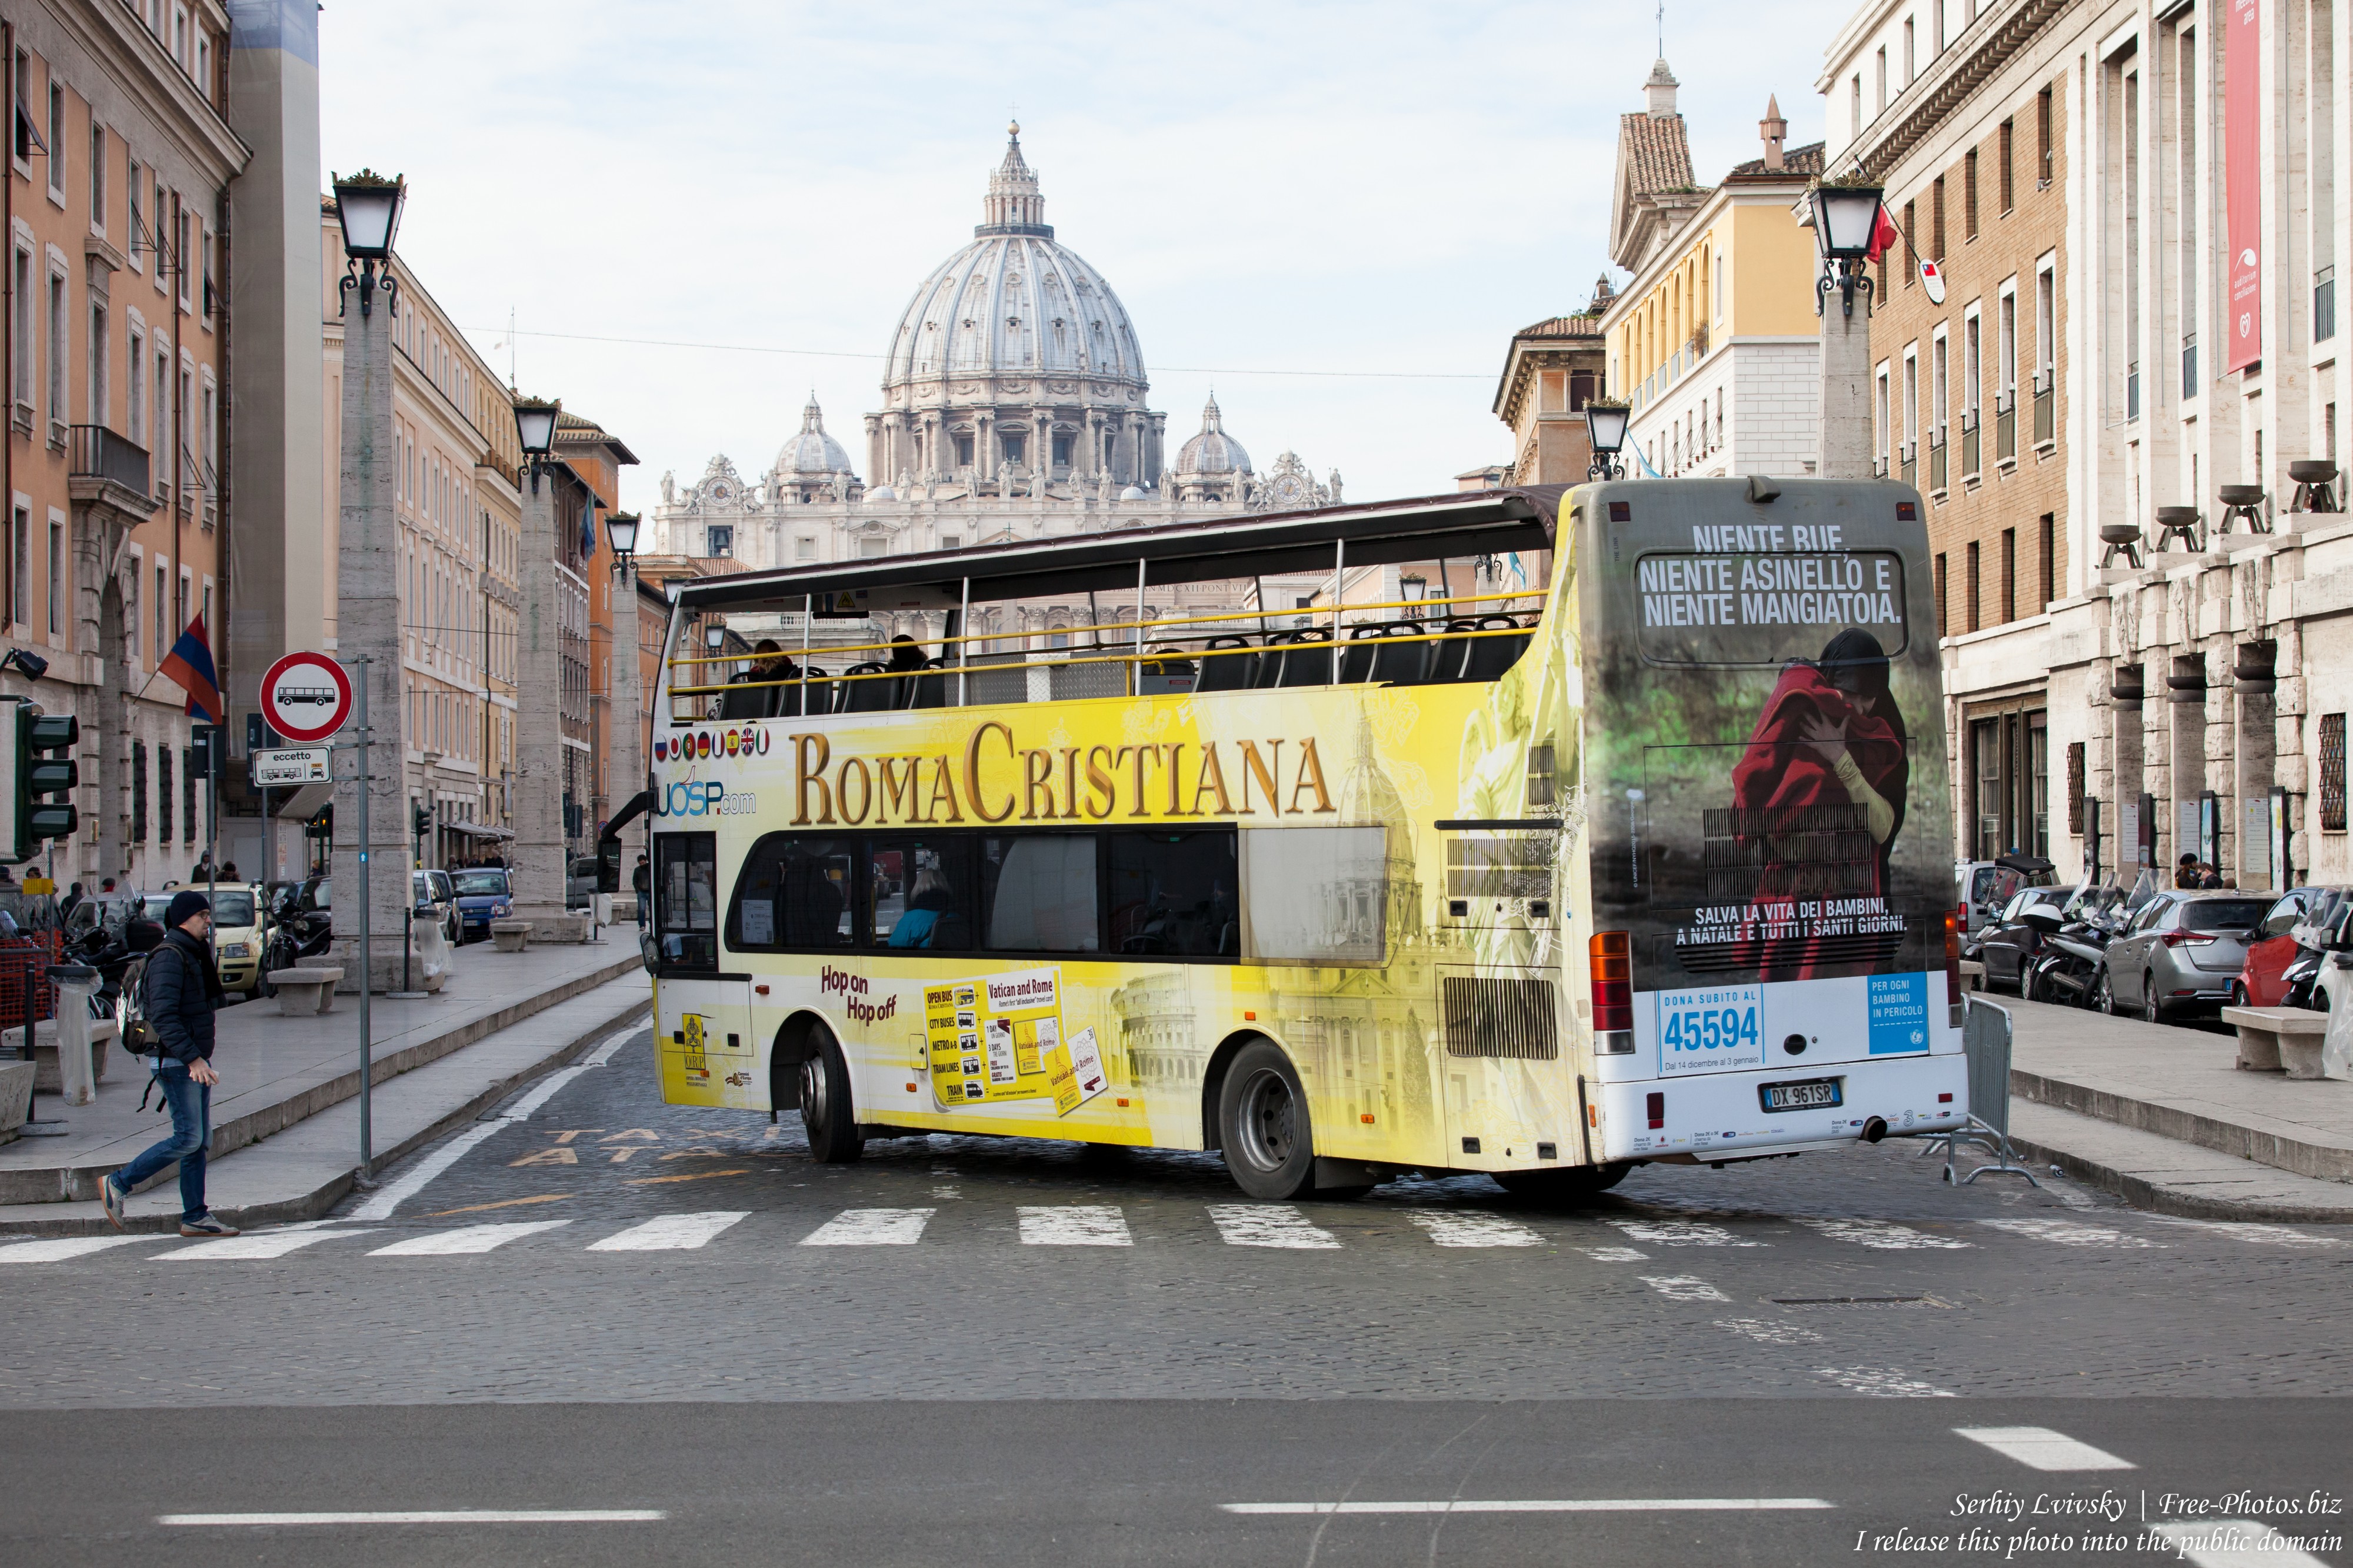 Rome and Vatican photographed in January 2016 by Serhiy Lvivsky, picture 3